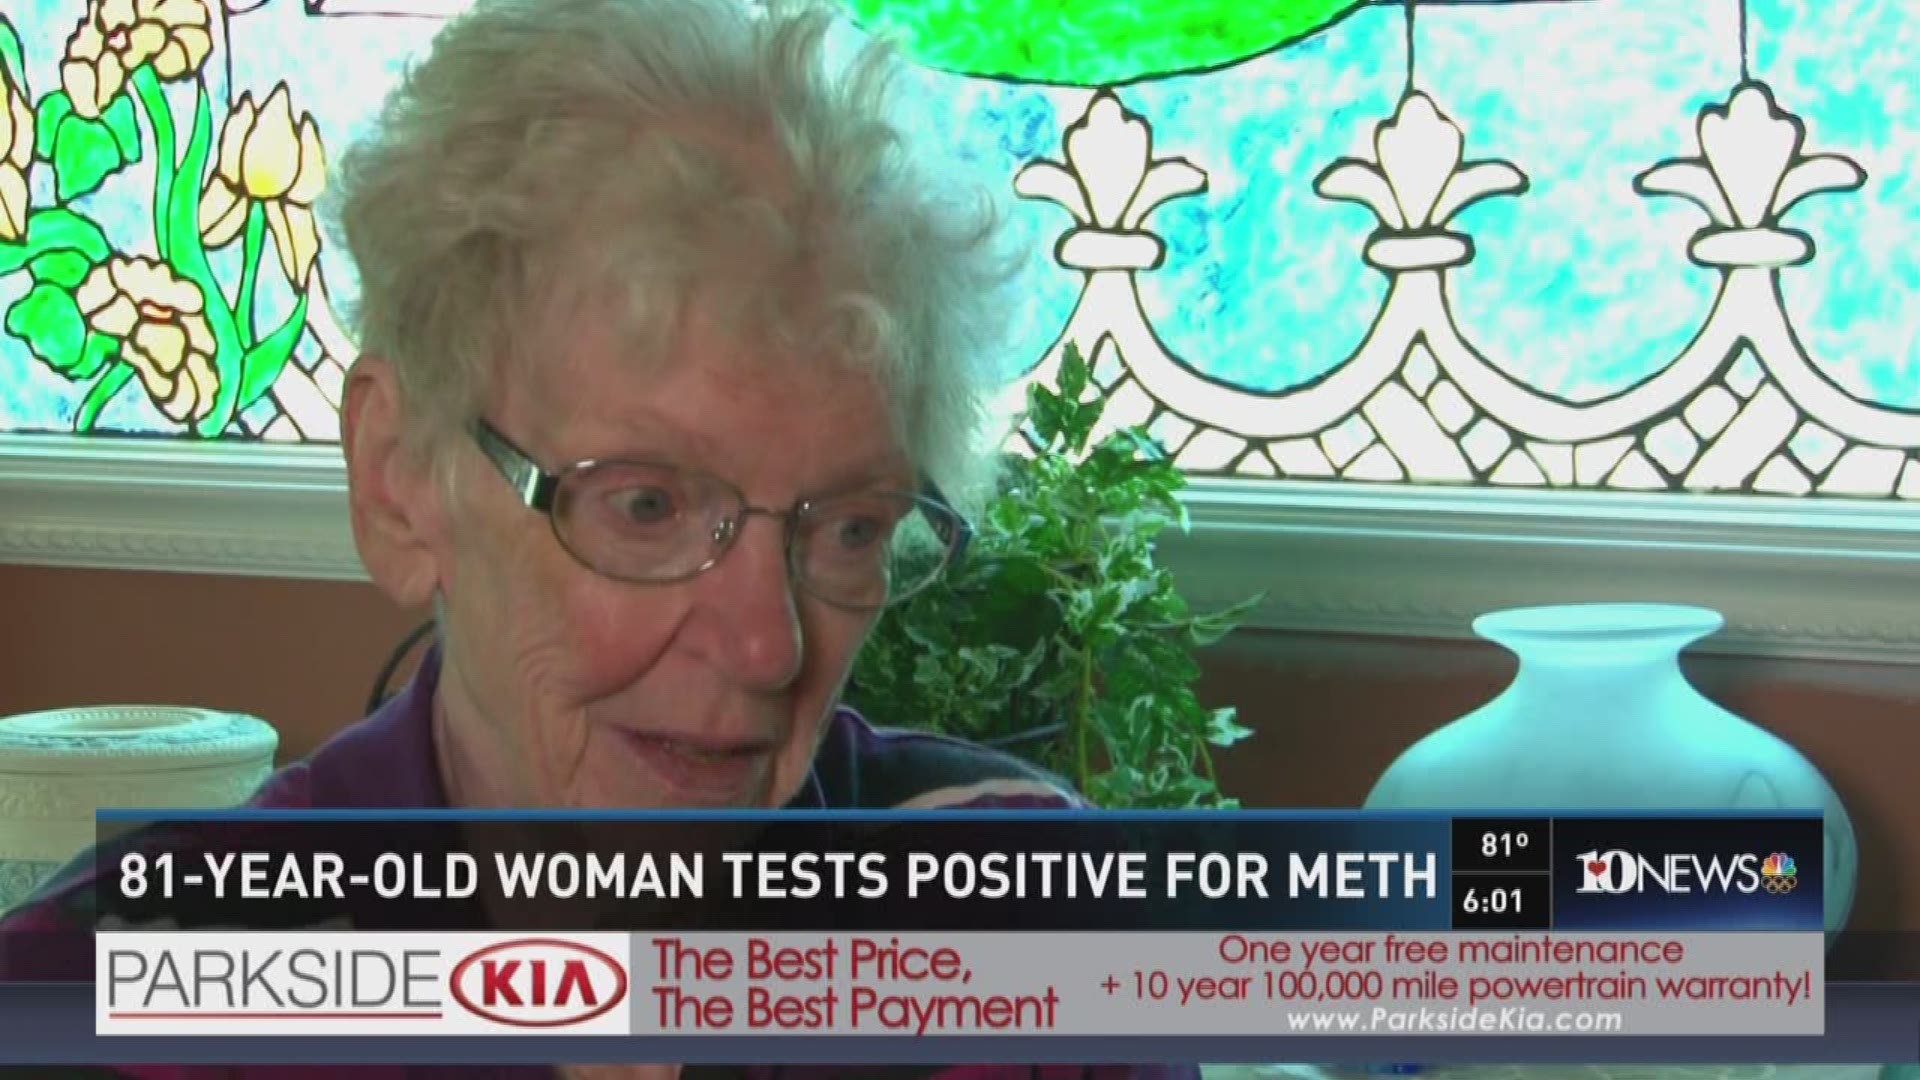 Hazel Kettner tested positive for Methamphetamine - but she says she doesn't even know what Meth is.